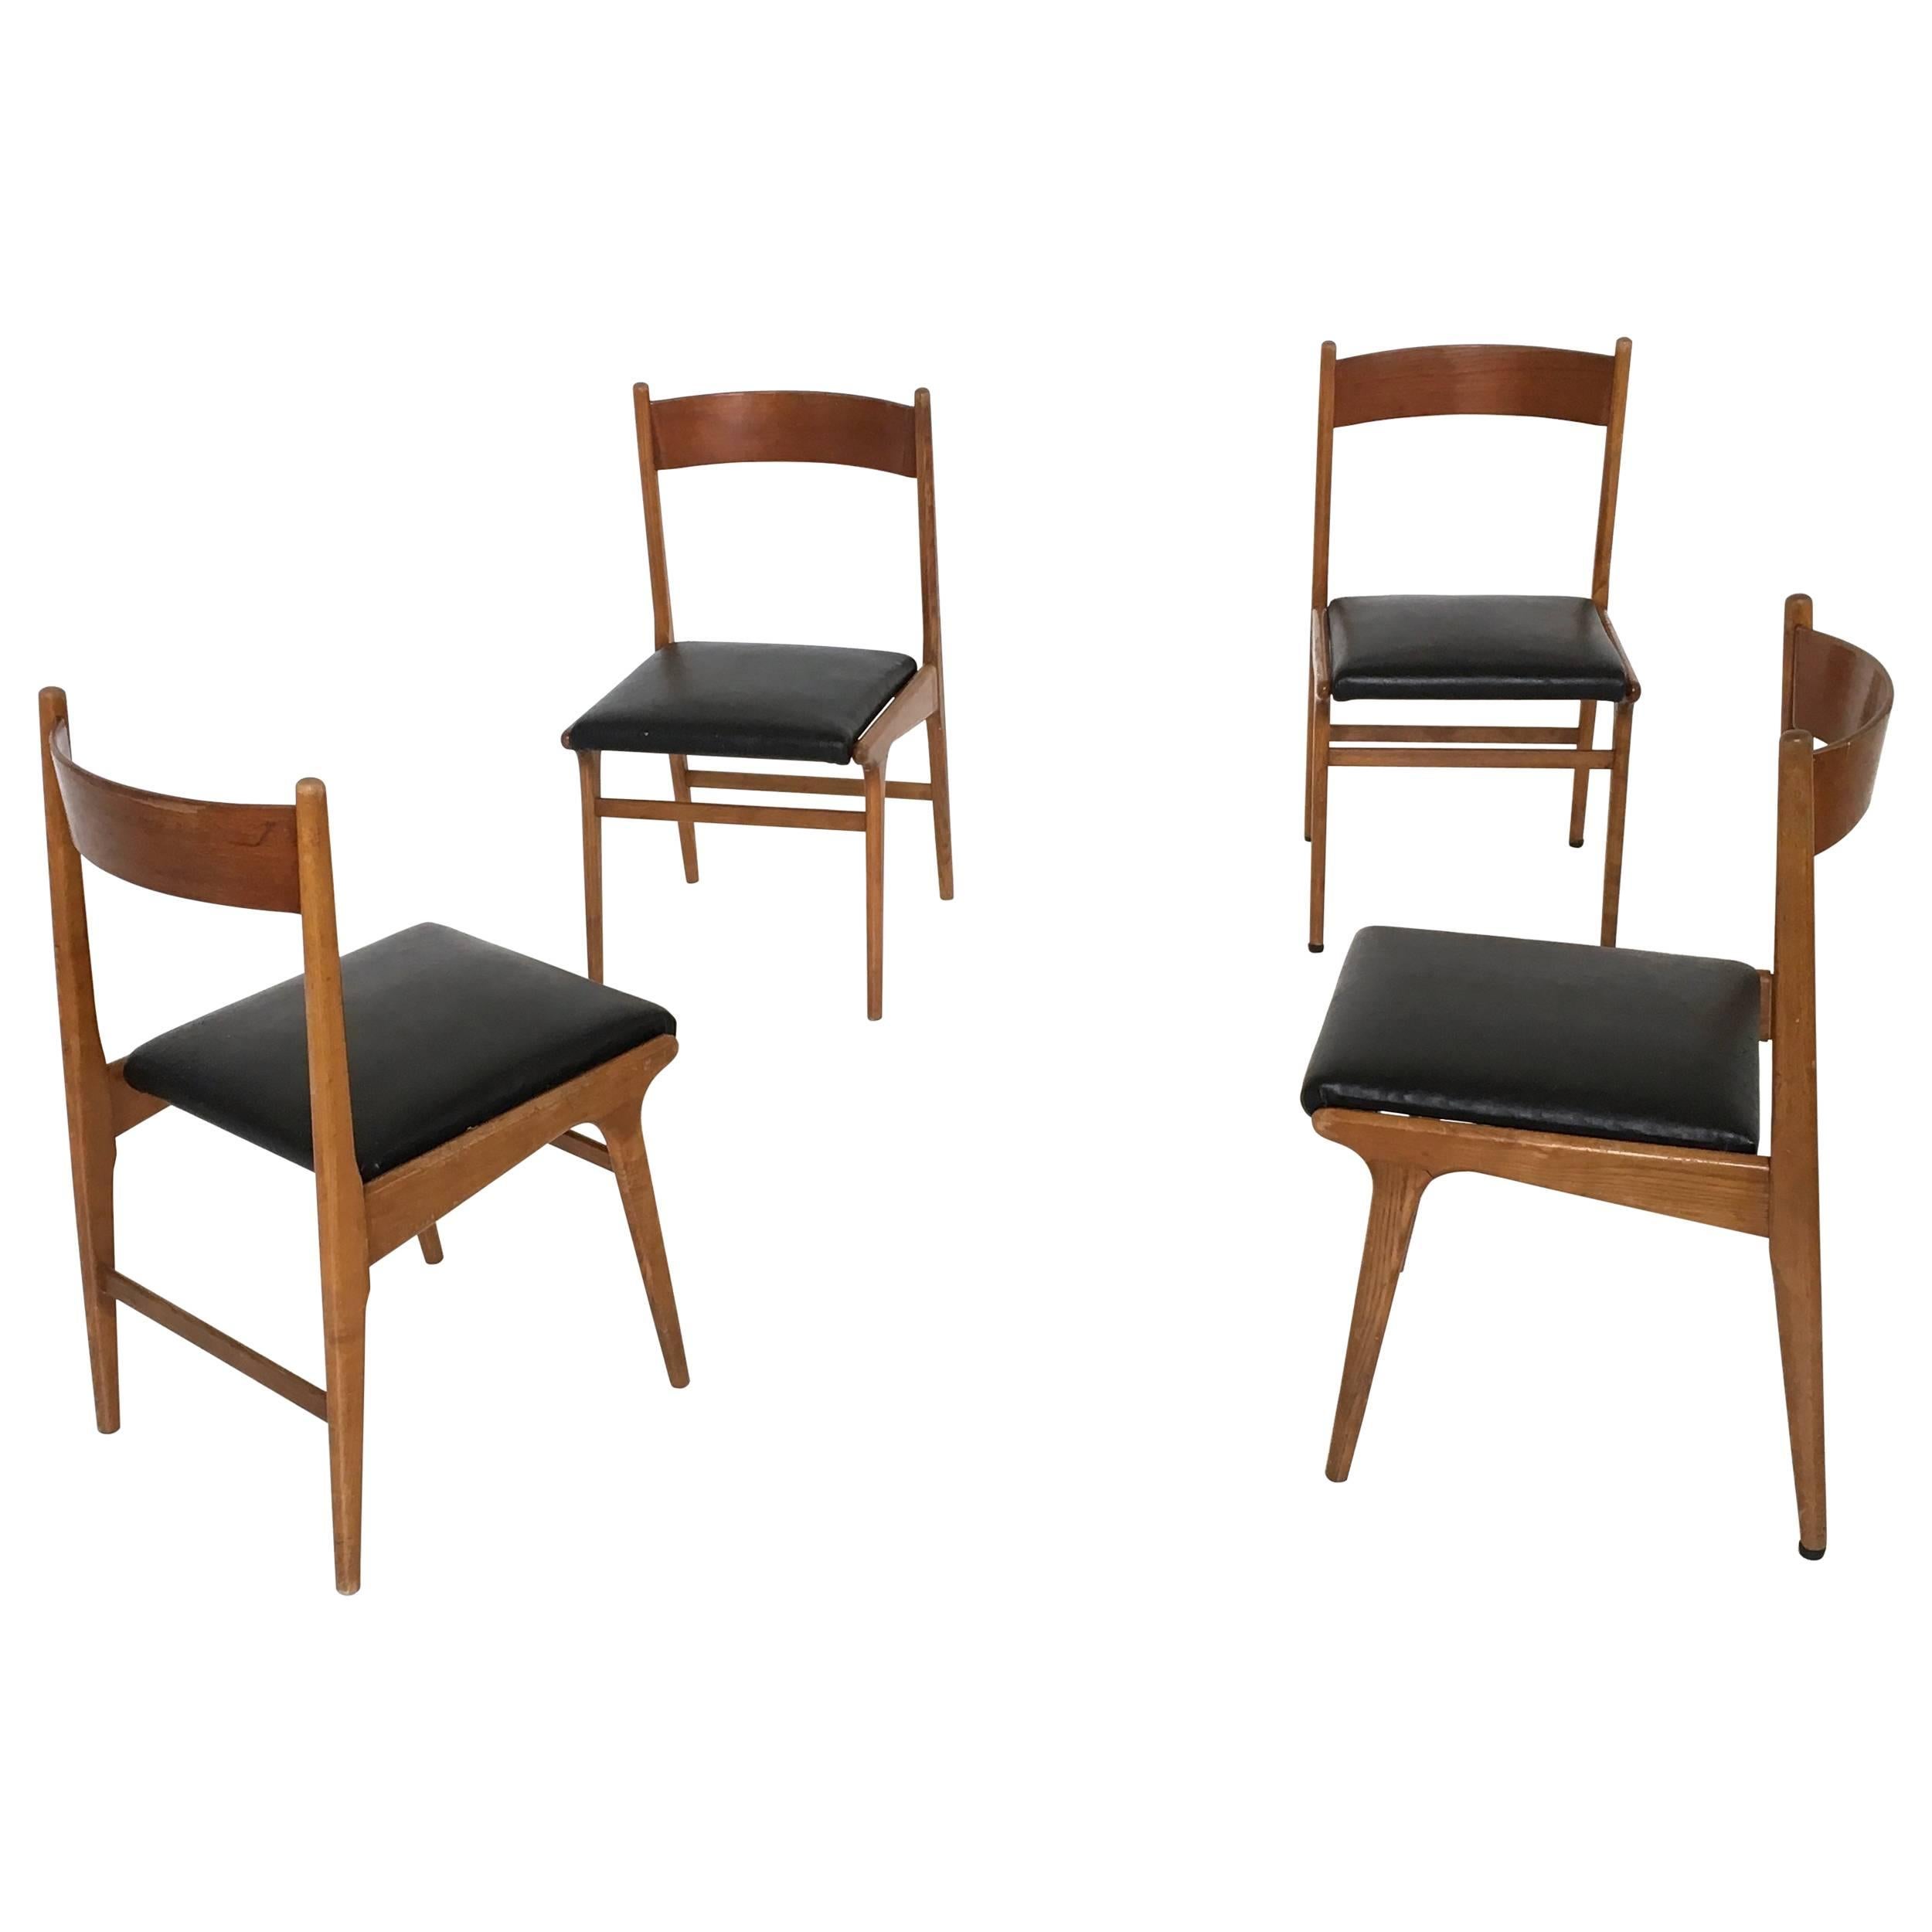 Set of Four Vintage Walnut Dining Chairs, 1960s